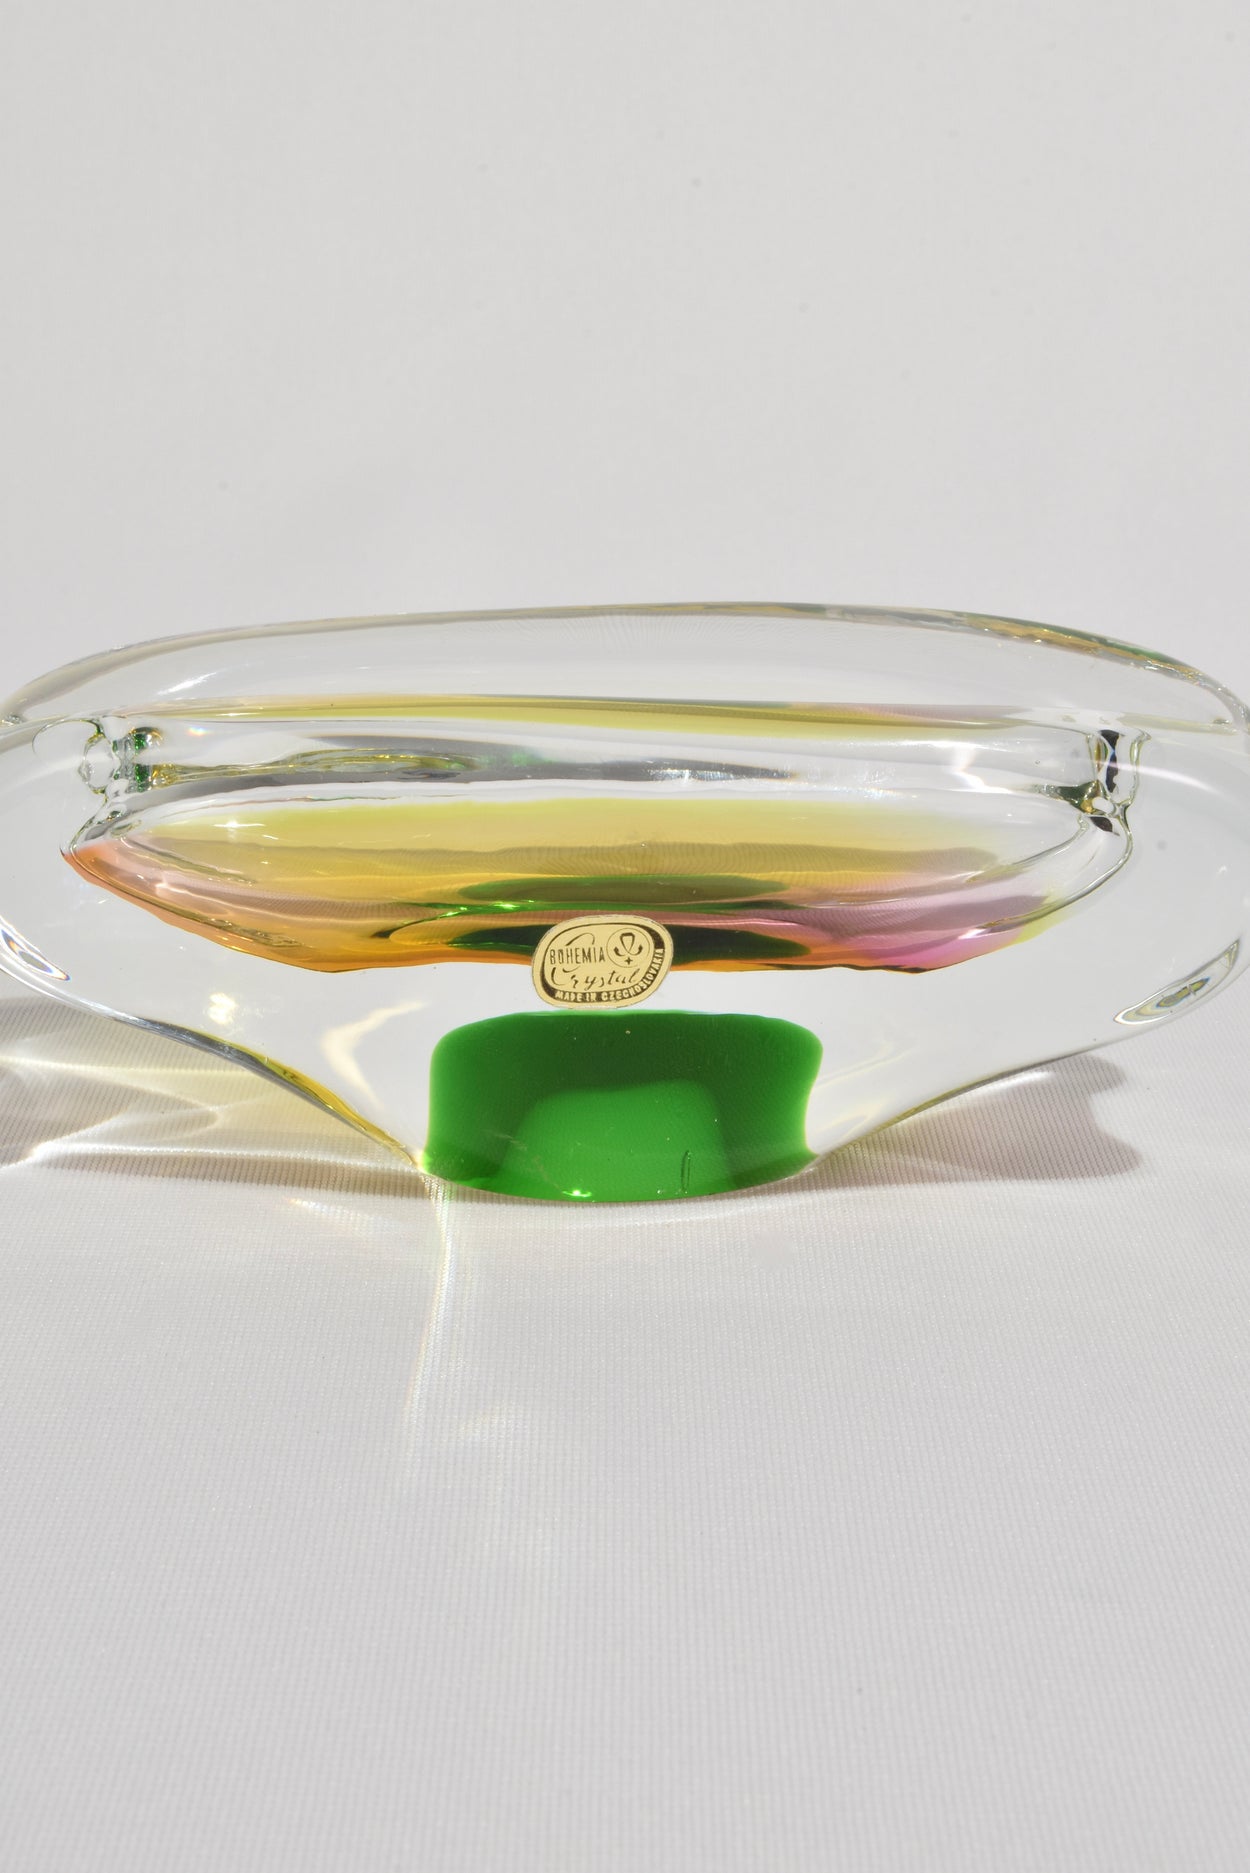 Colorful Glass Bowl